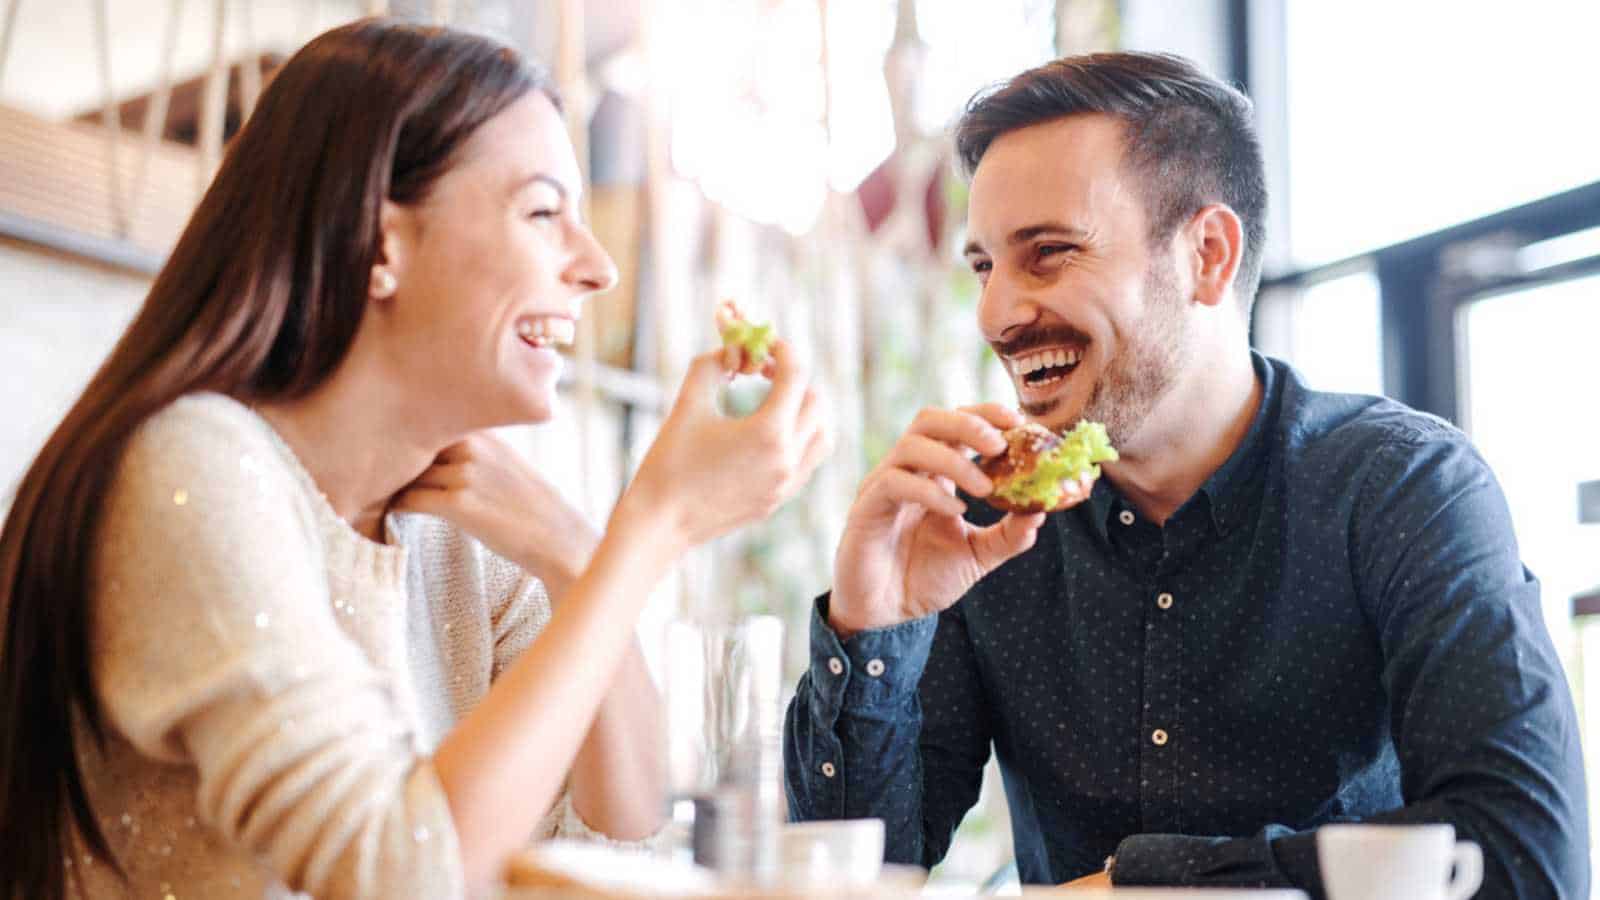 Couples eating in restaurant